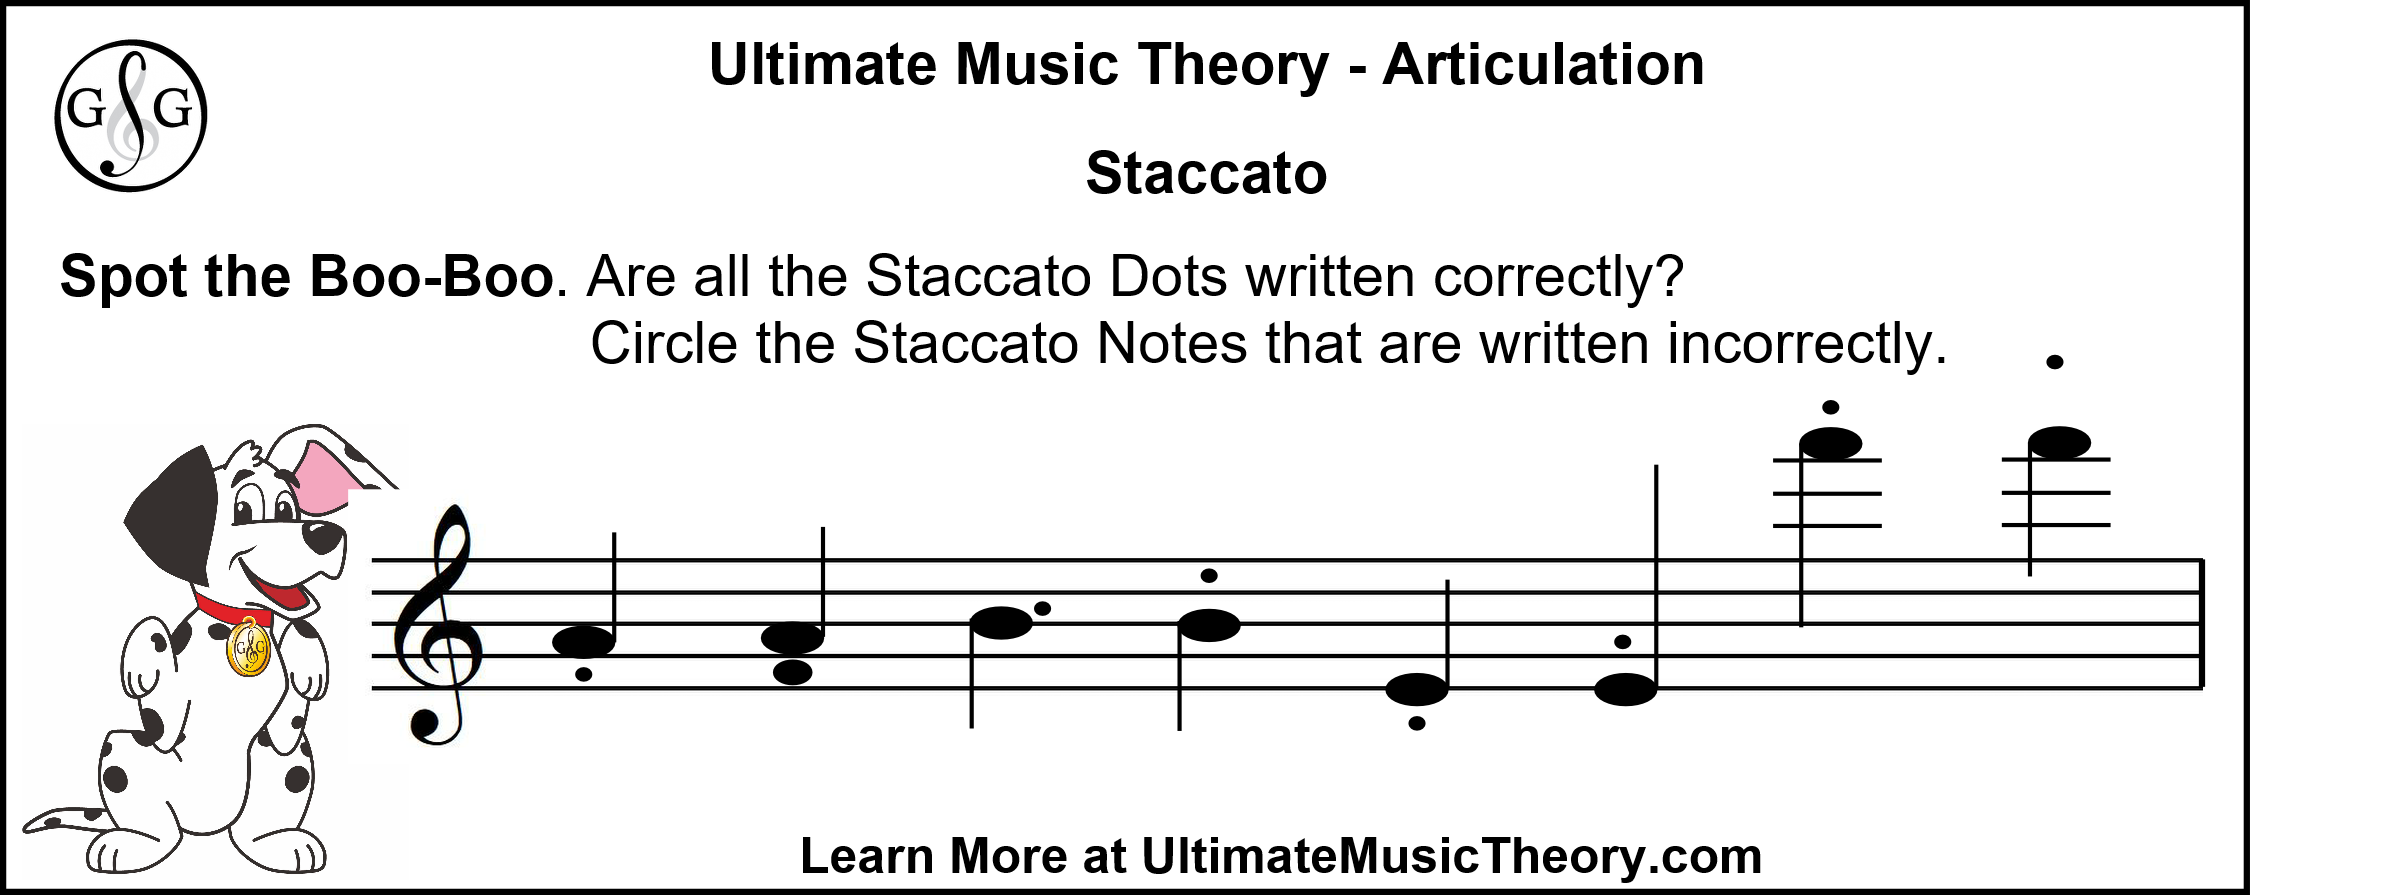 UMT Articulation - Staccato Spot the Boo-Boo